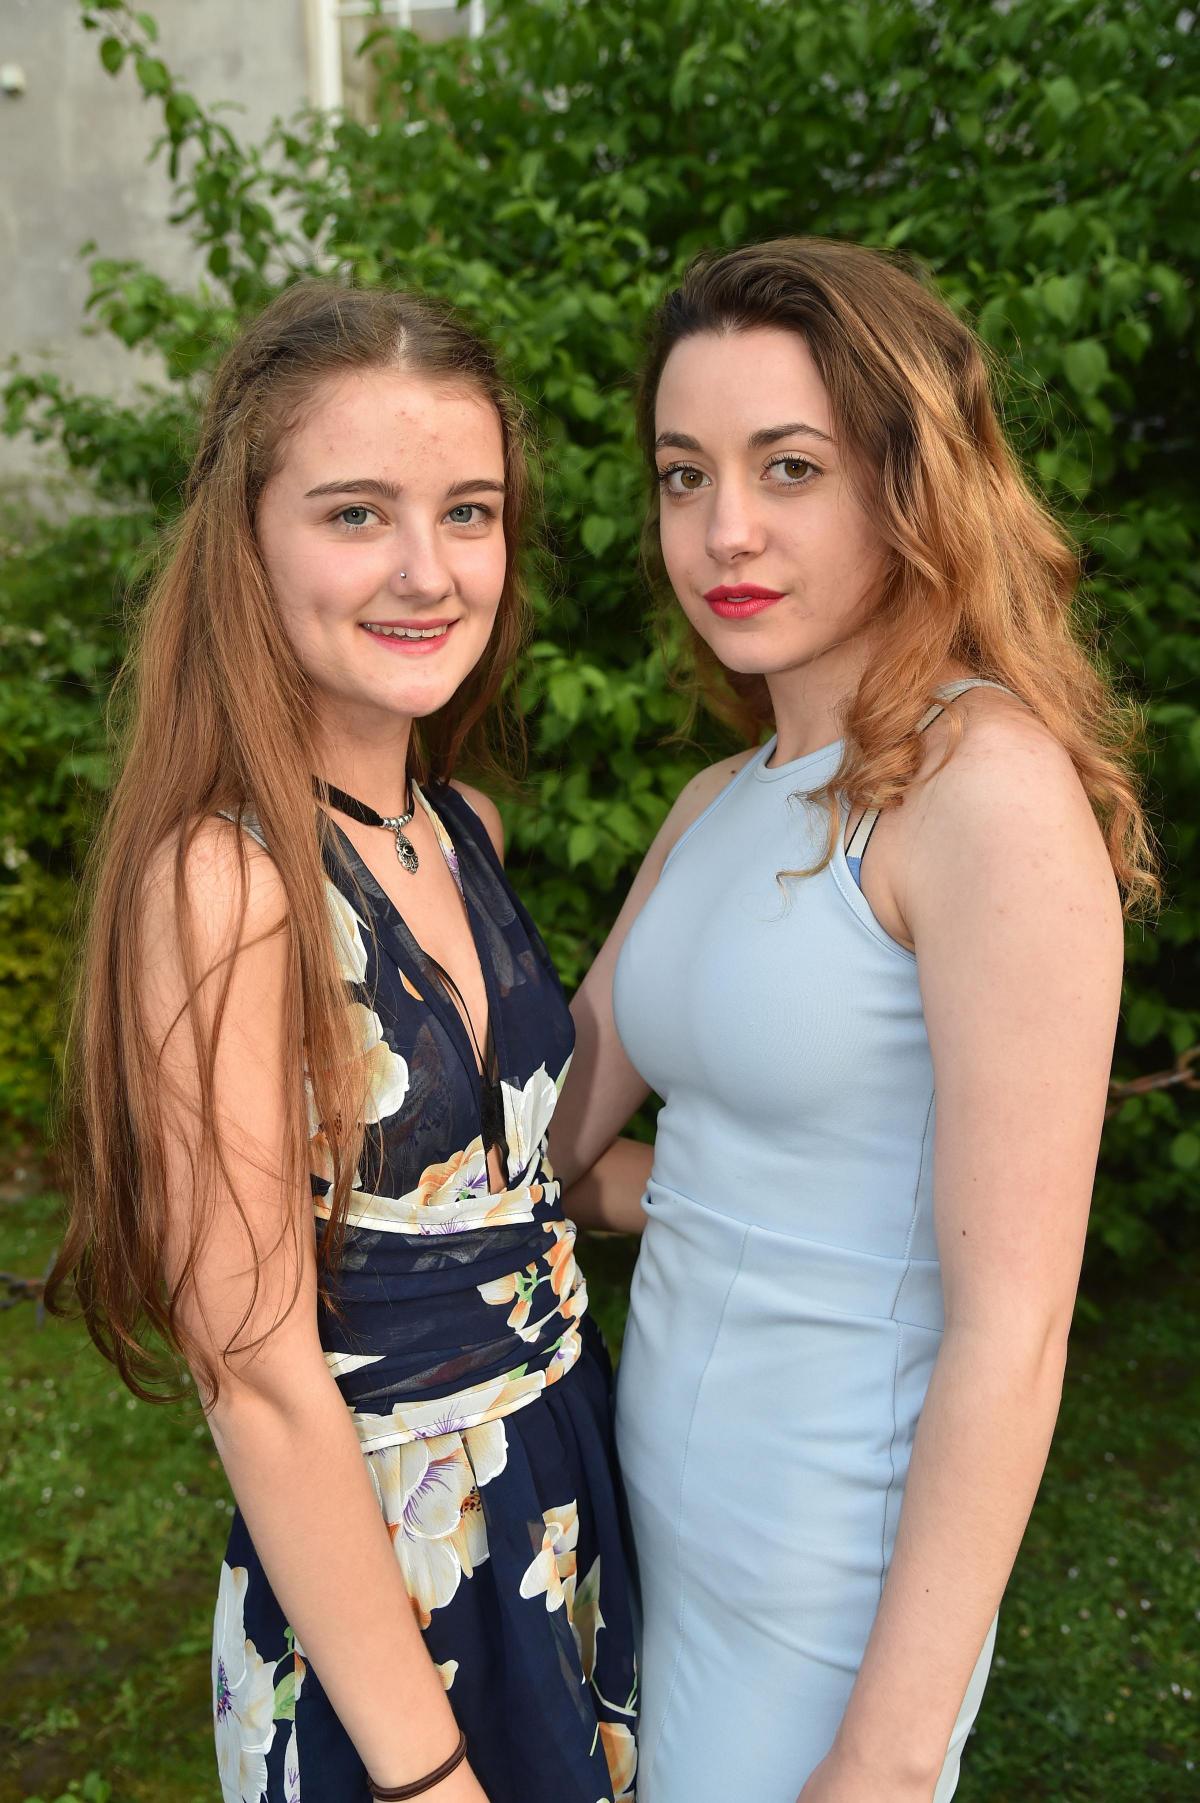 Colfox and Beaminster Sixth Form Prom